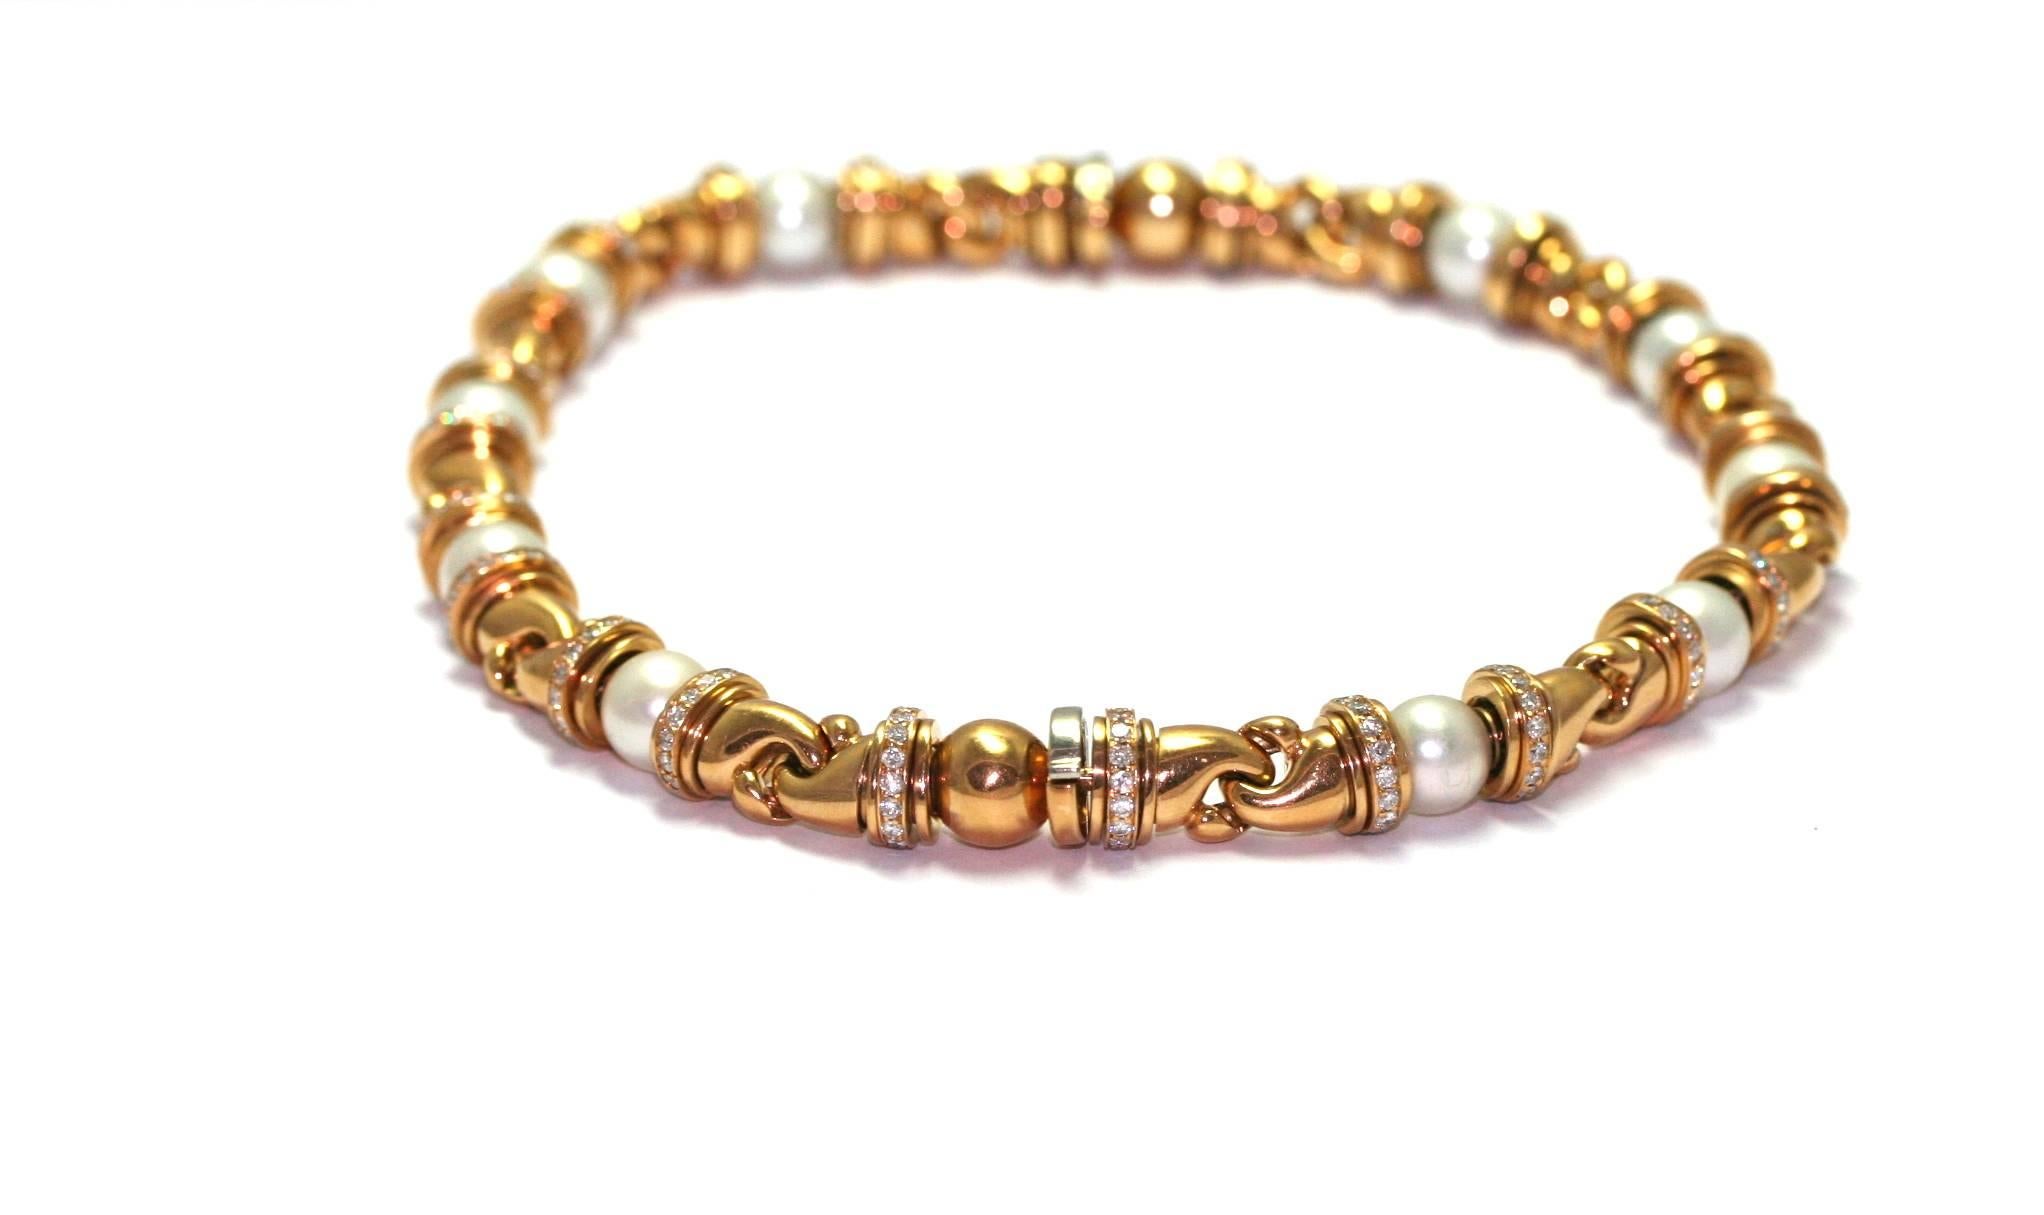 BVLGARI "Gancio" 2 bracelets convertible in necklace, yellow gold, set with diamonds and 5 pearls each, signed
